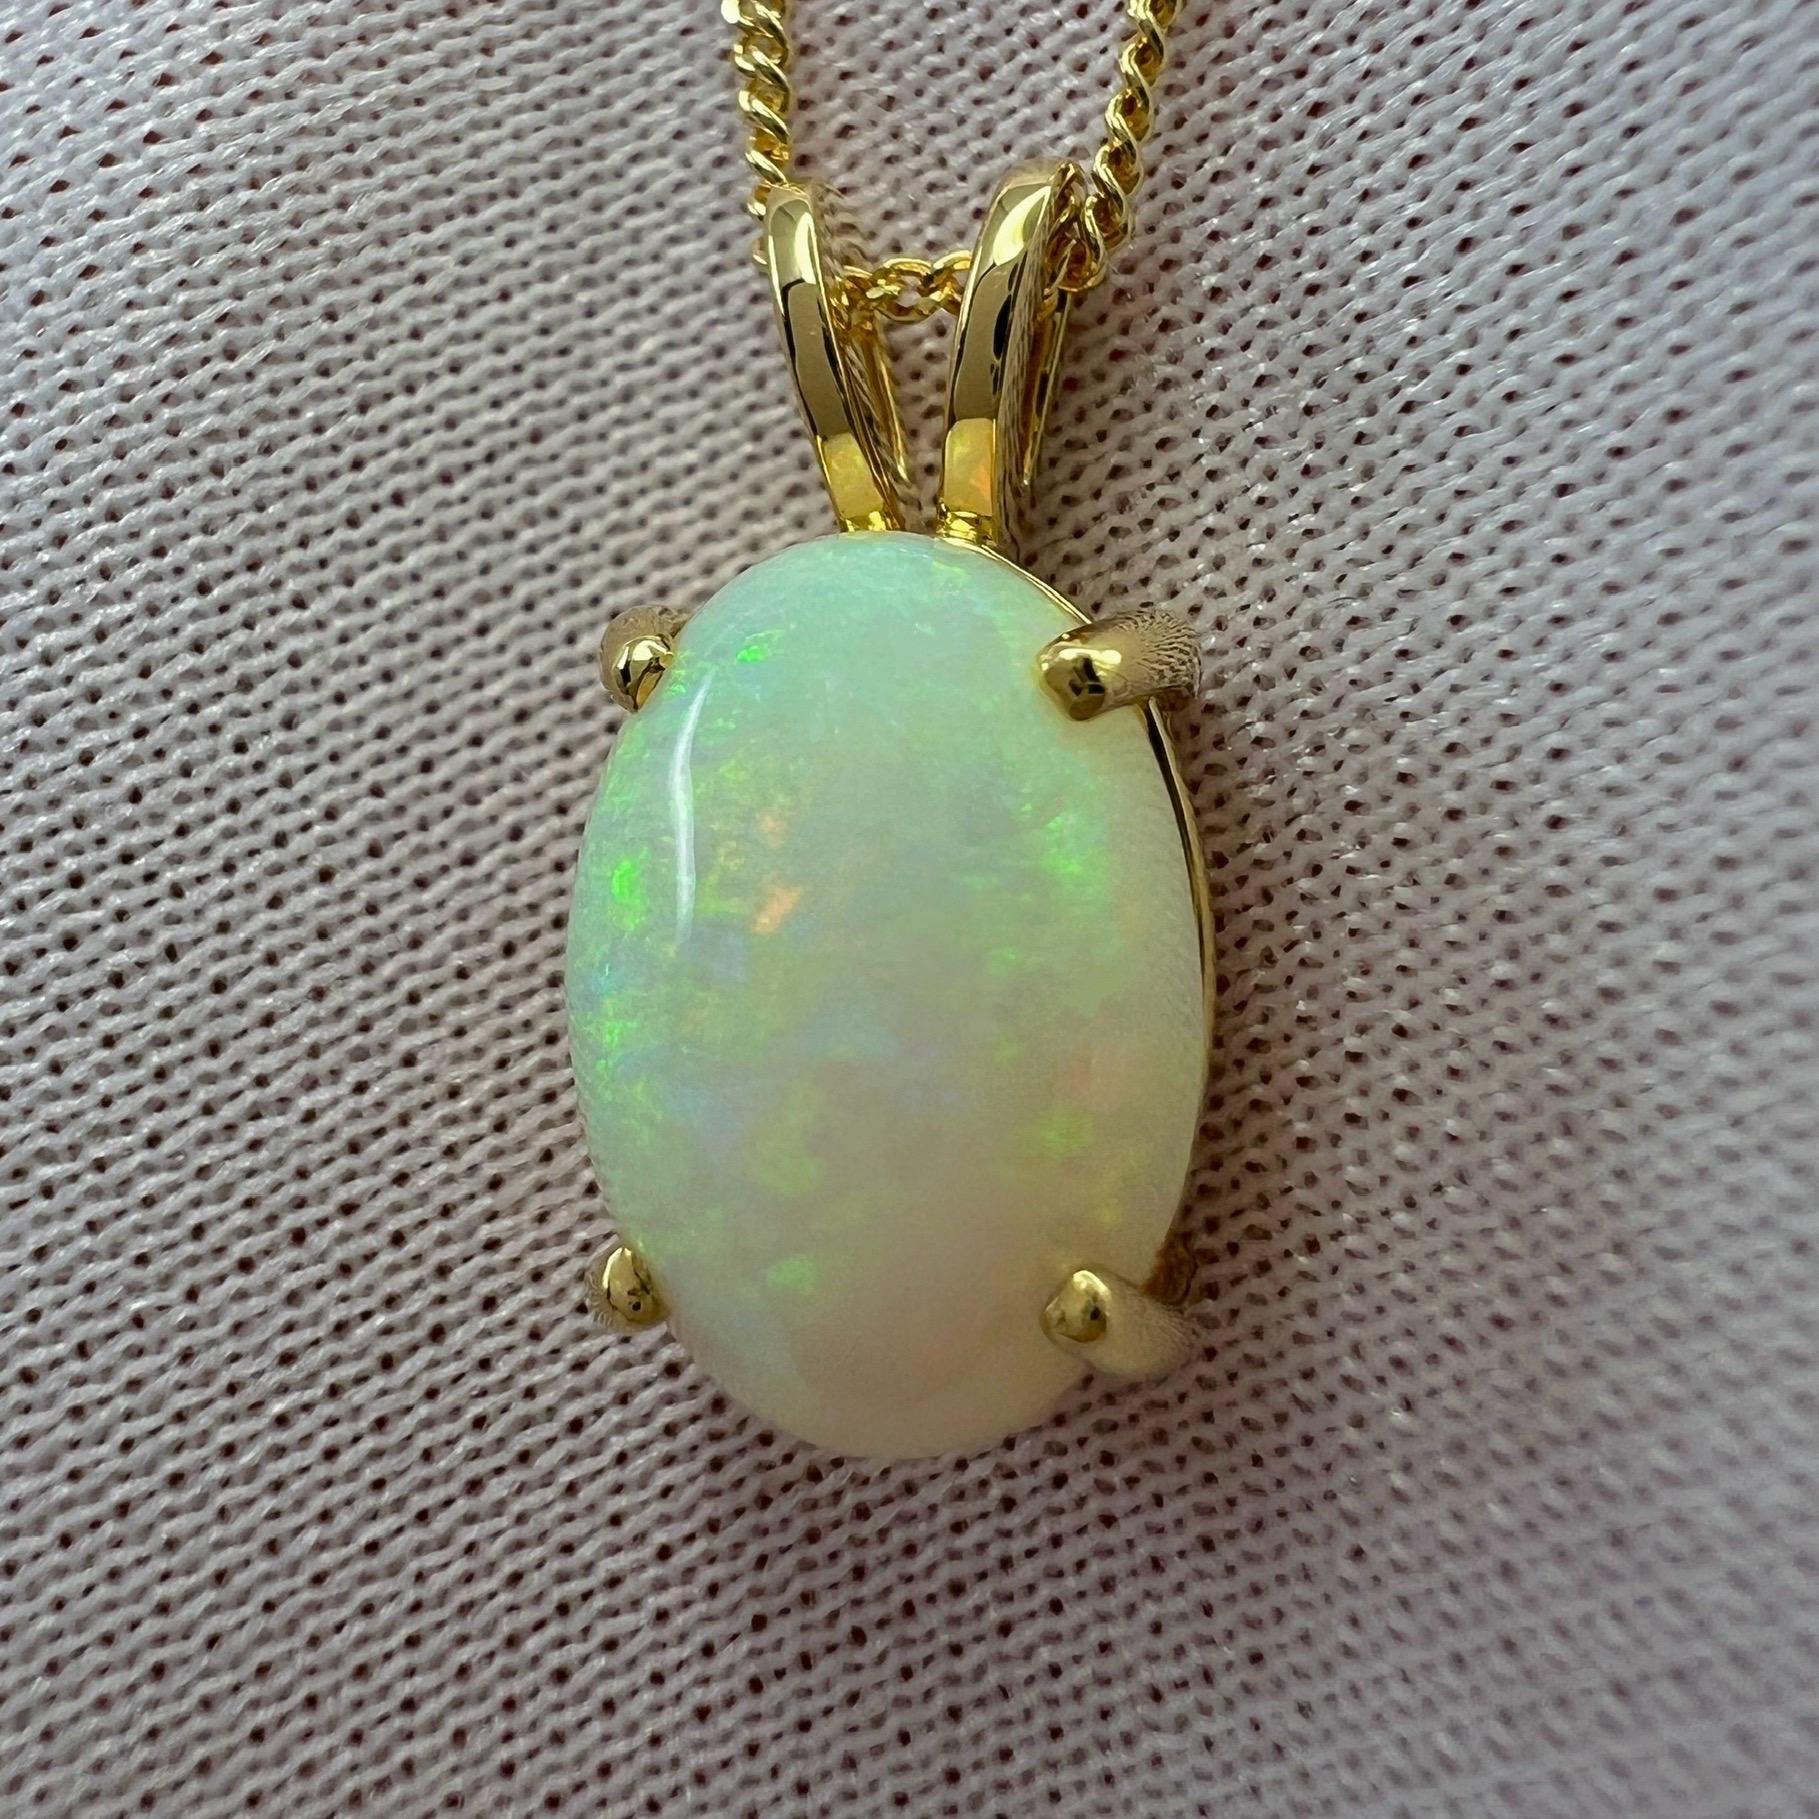 3ct Fine Australian White Opal Oval Cabochon 18k Yellow Gold Pendant Necklace For Sale 1